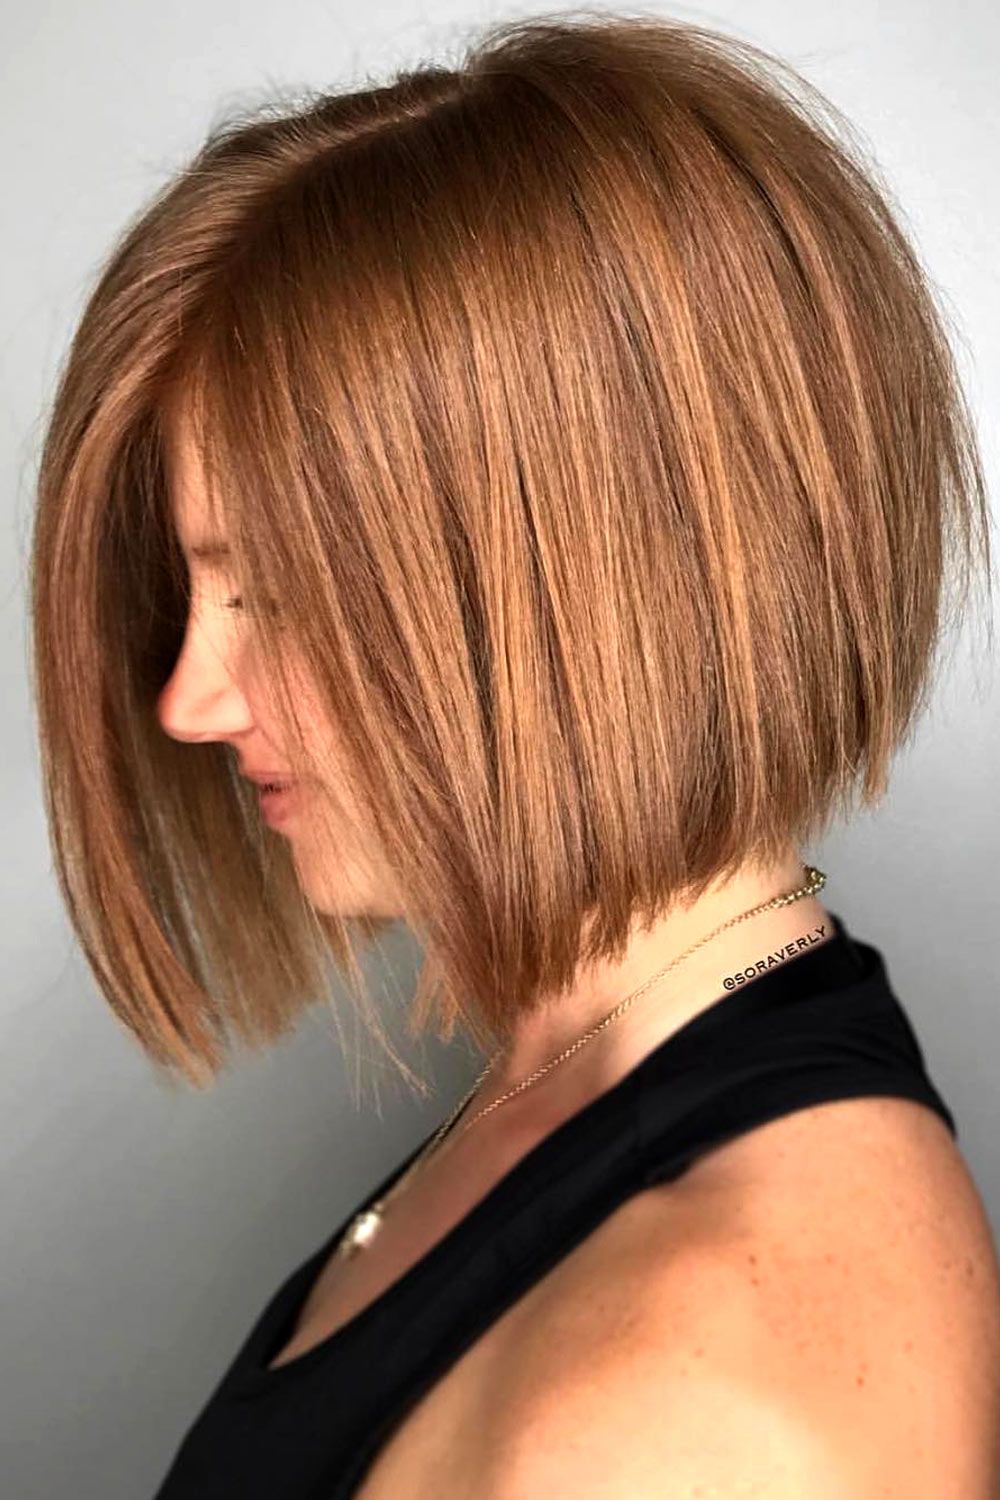 Short Bob Hairstyles with a Touch of Razor